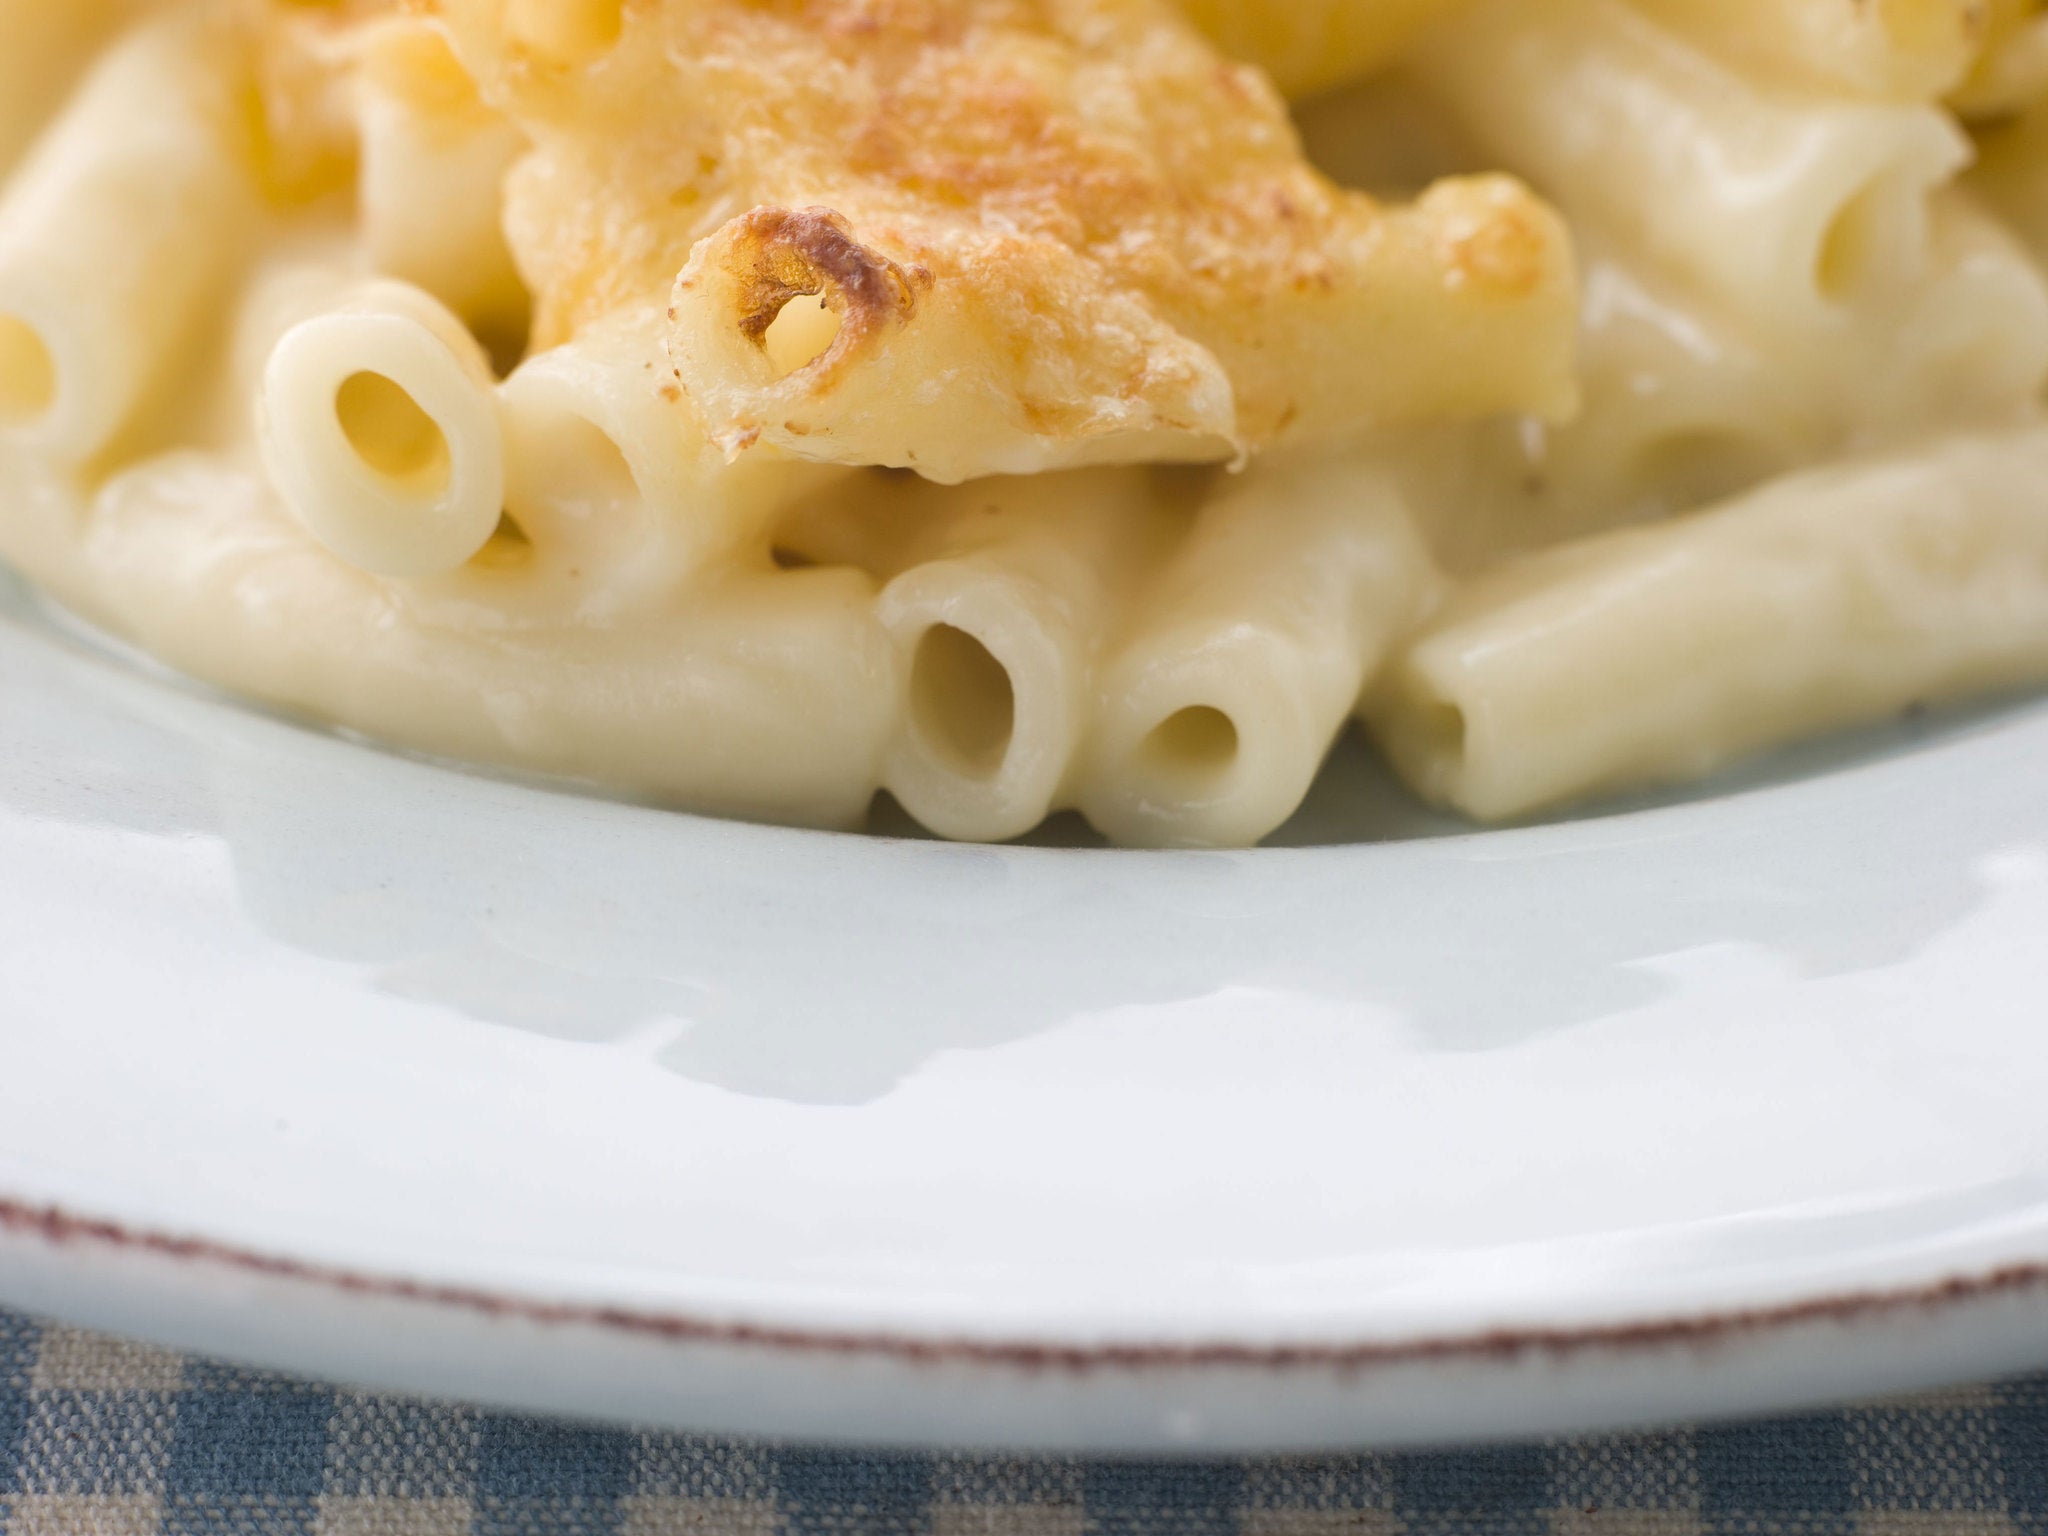 Kraft was forced to ask customers to return its mac and cheese after metal bits were discovered in the food by eight separate customers